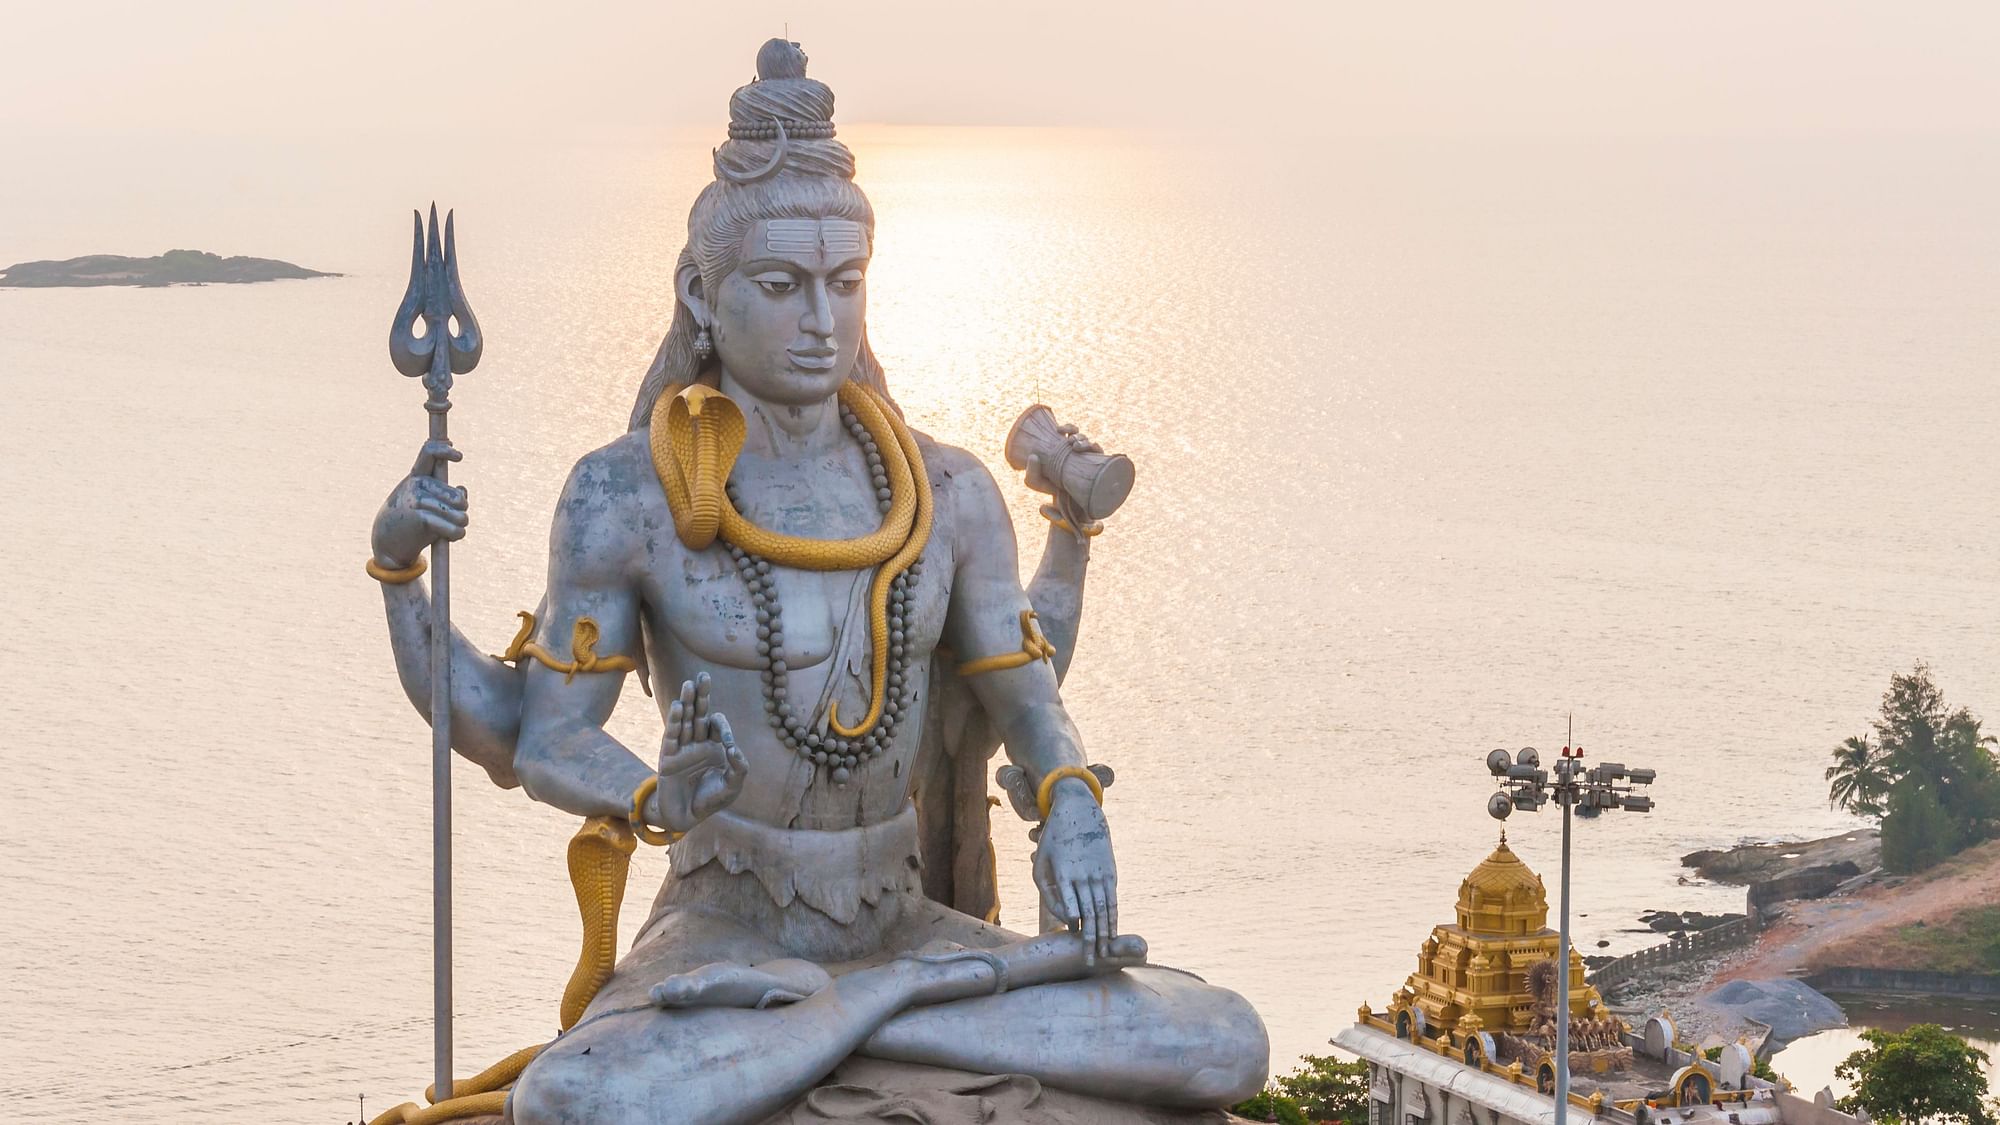 Sawan Somwar 2019: According to the popular belief, worshiping Lord Shiva during the month of Sawan brings in favorable results. 